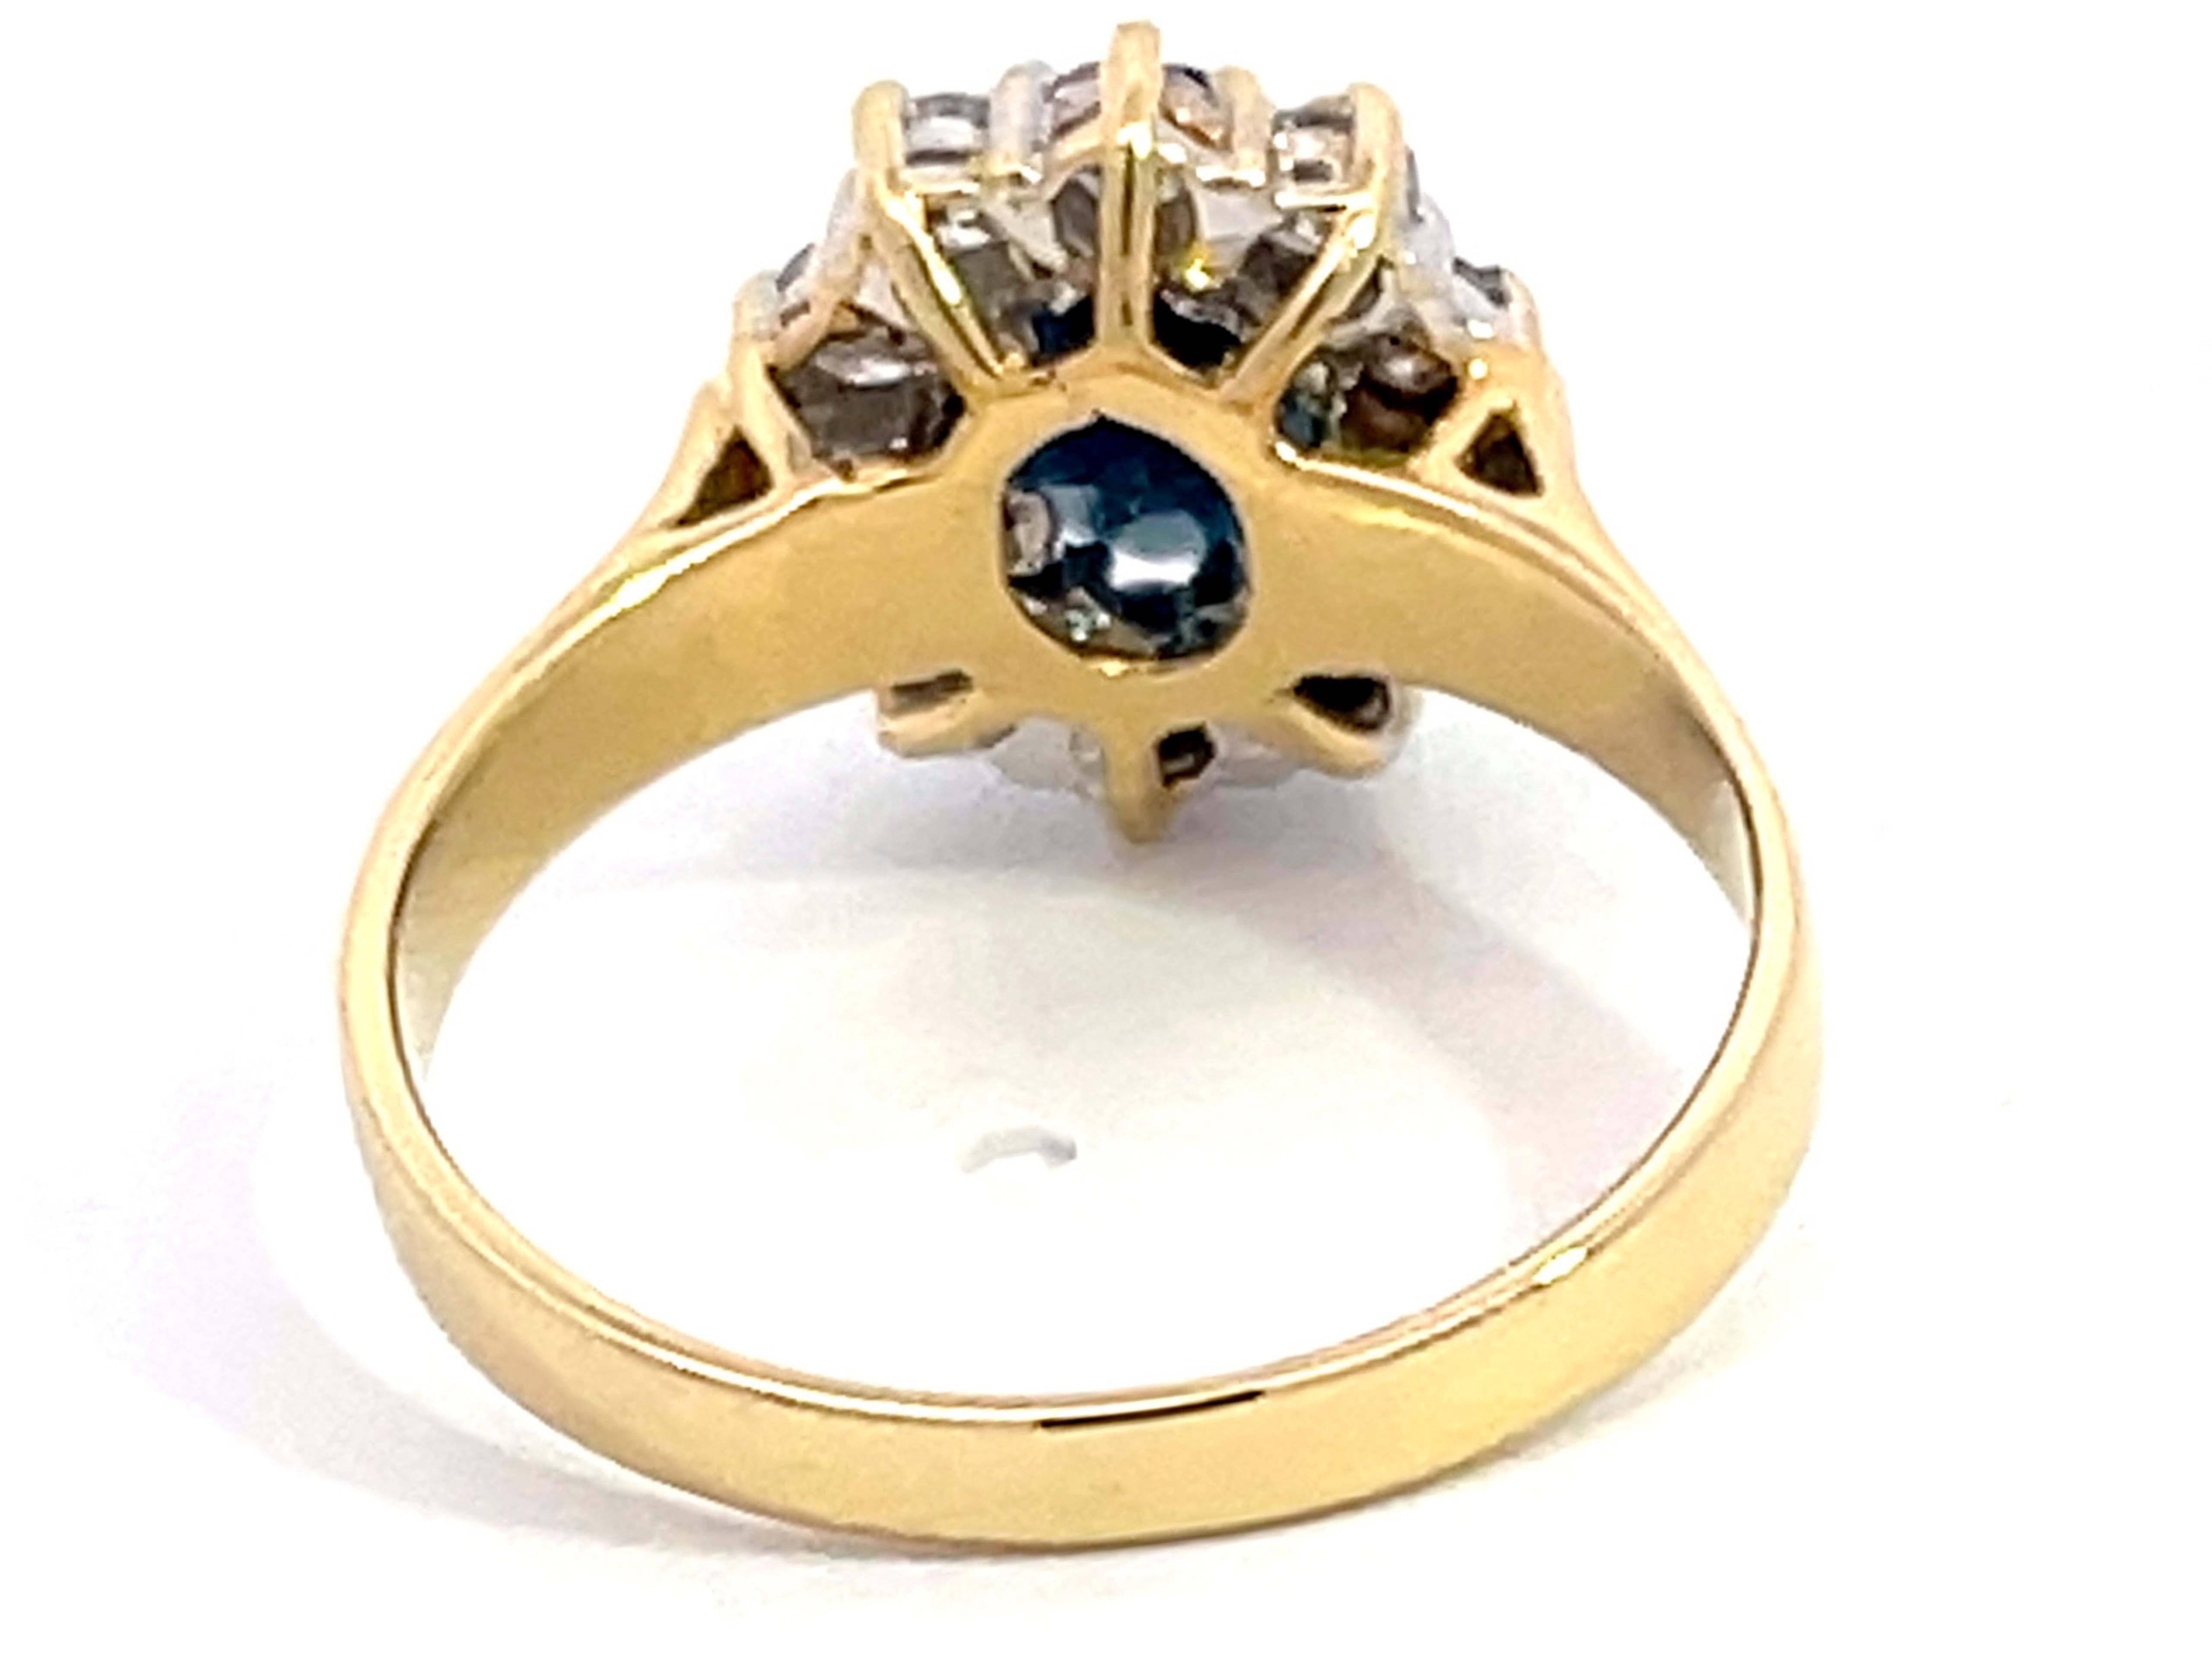 Blue Sapphire Diamond Halo Ring in 18k Yellow Gold In Excellent Condition For Sale In Honolulu, HI